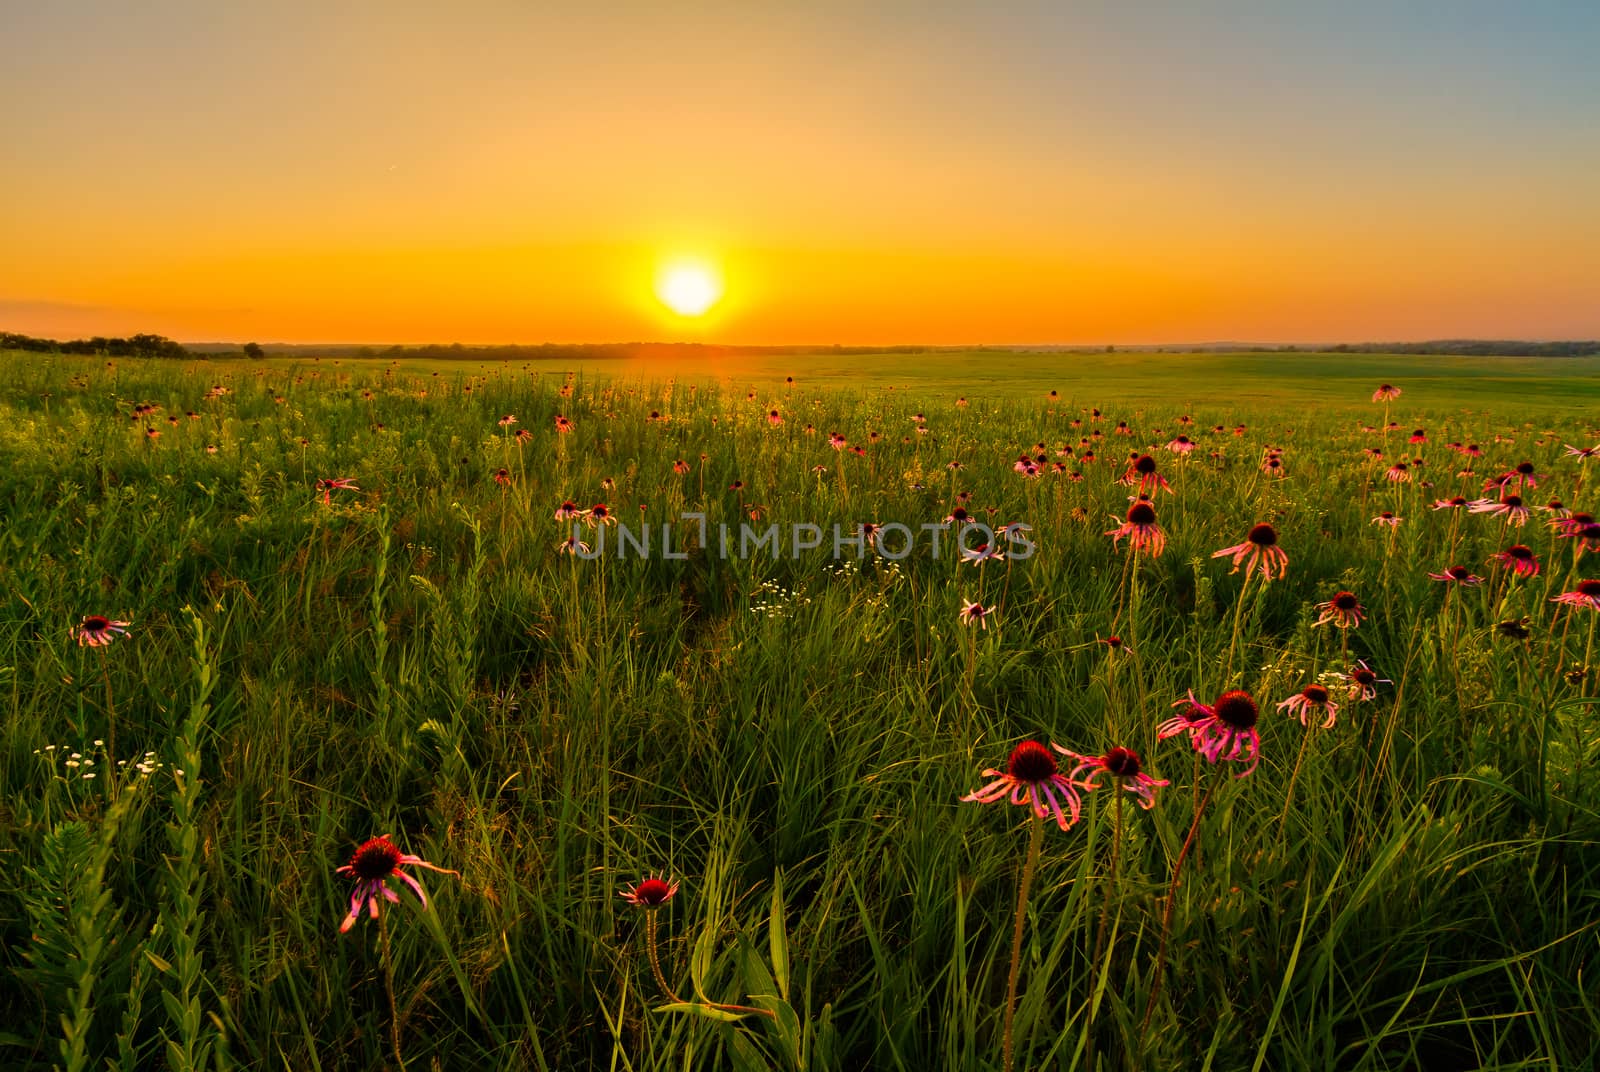 Sunset in a Prairie Field of Purple Coneflowers.  Wildflowers are an important part of a prairie and the restoration of them.